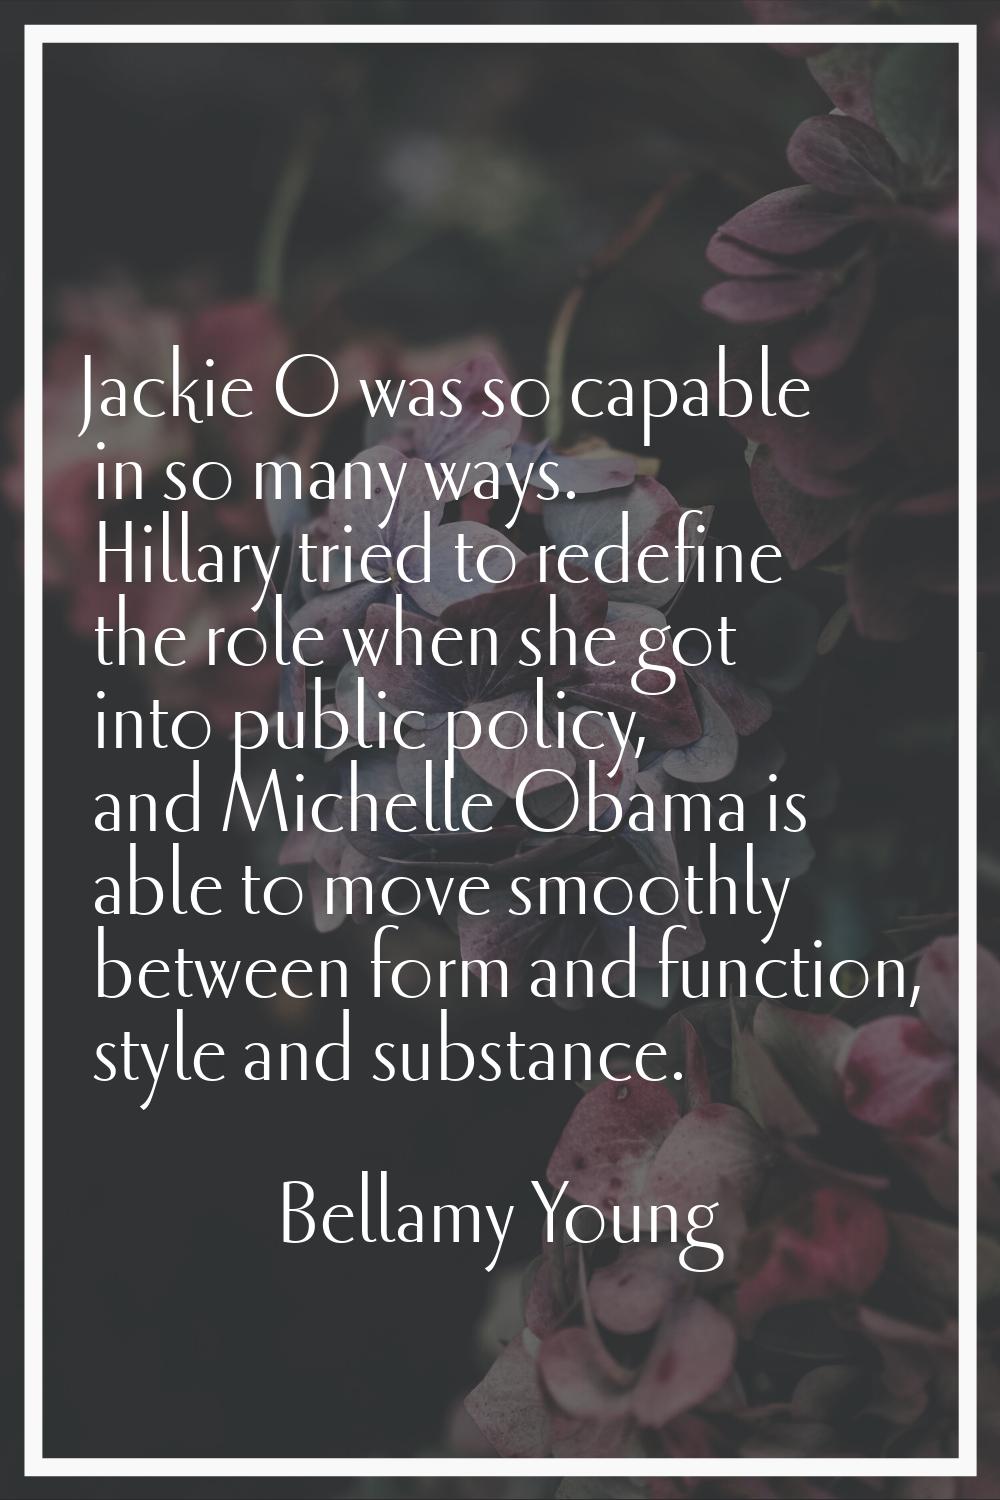 Jackie O was so capable in so many ways. Hillary tried to redefine the role when she got into publi